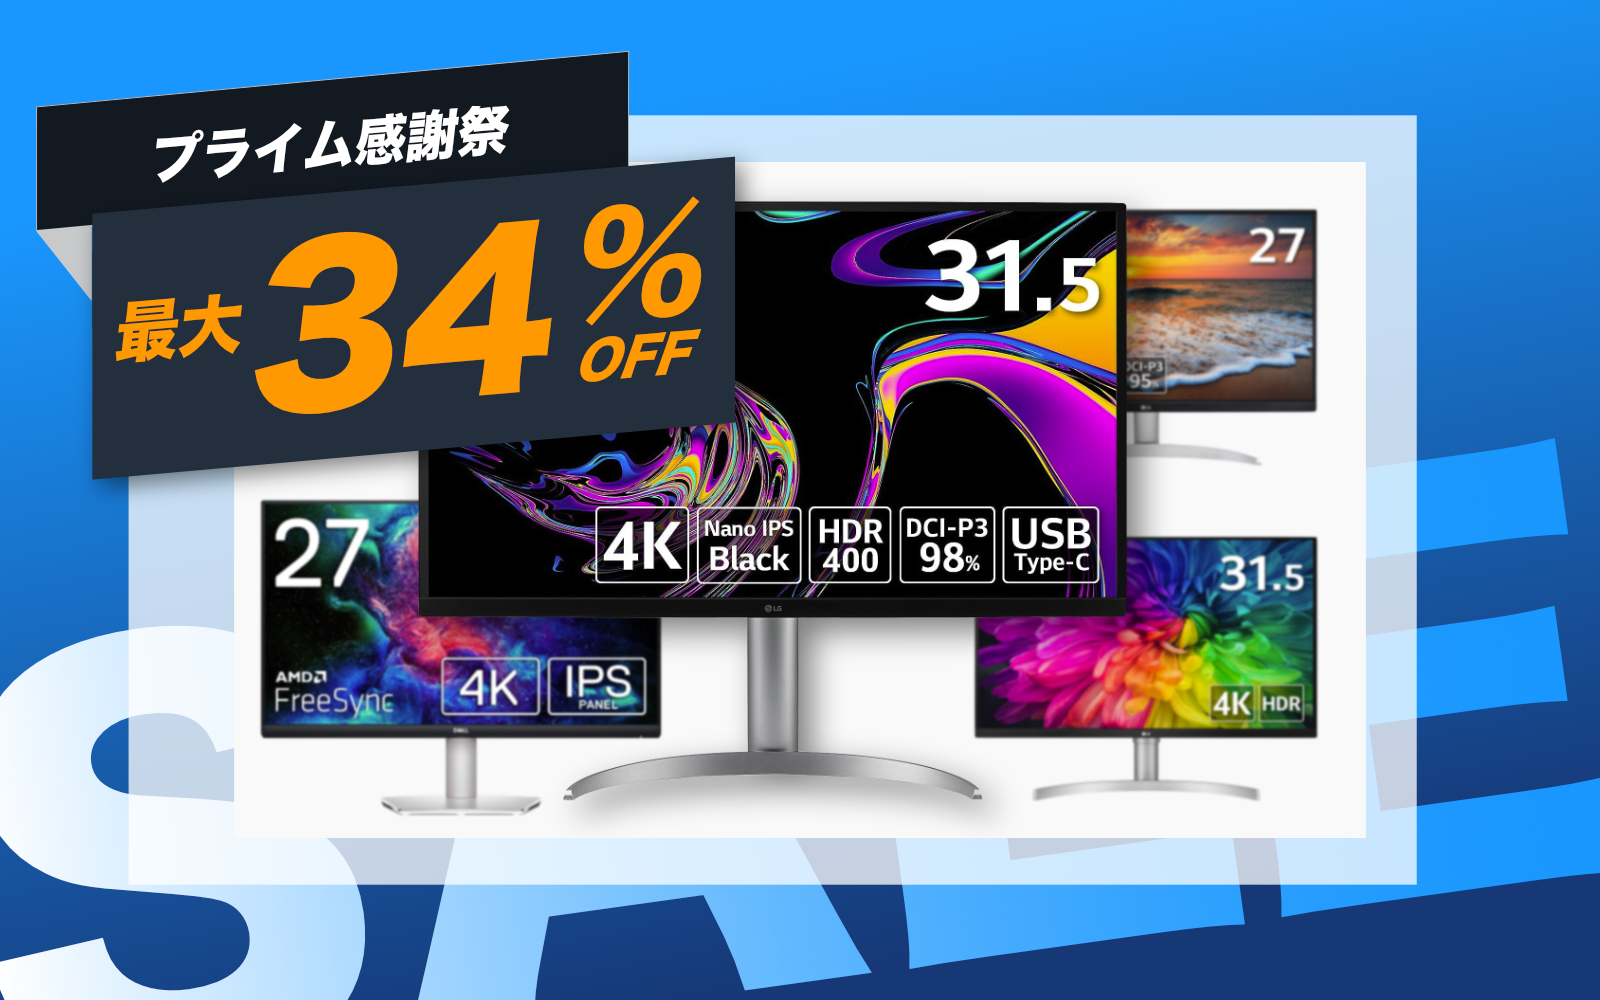 DELL and LG displays on sale